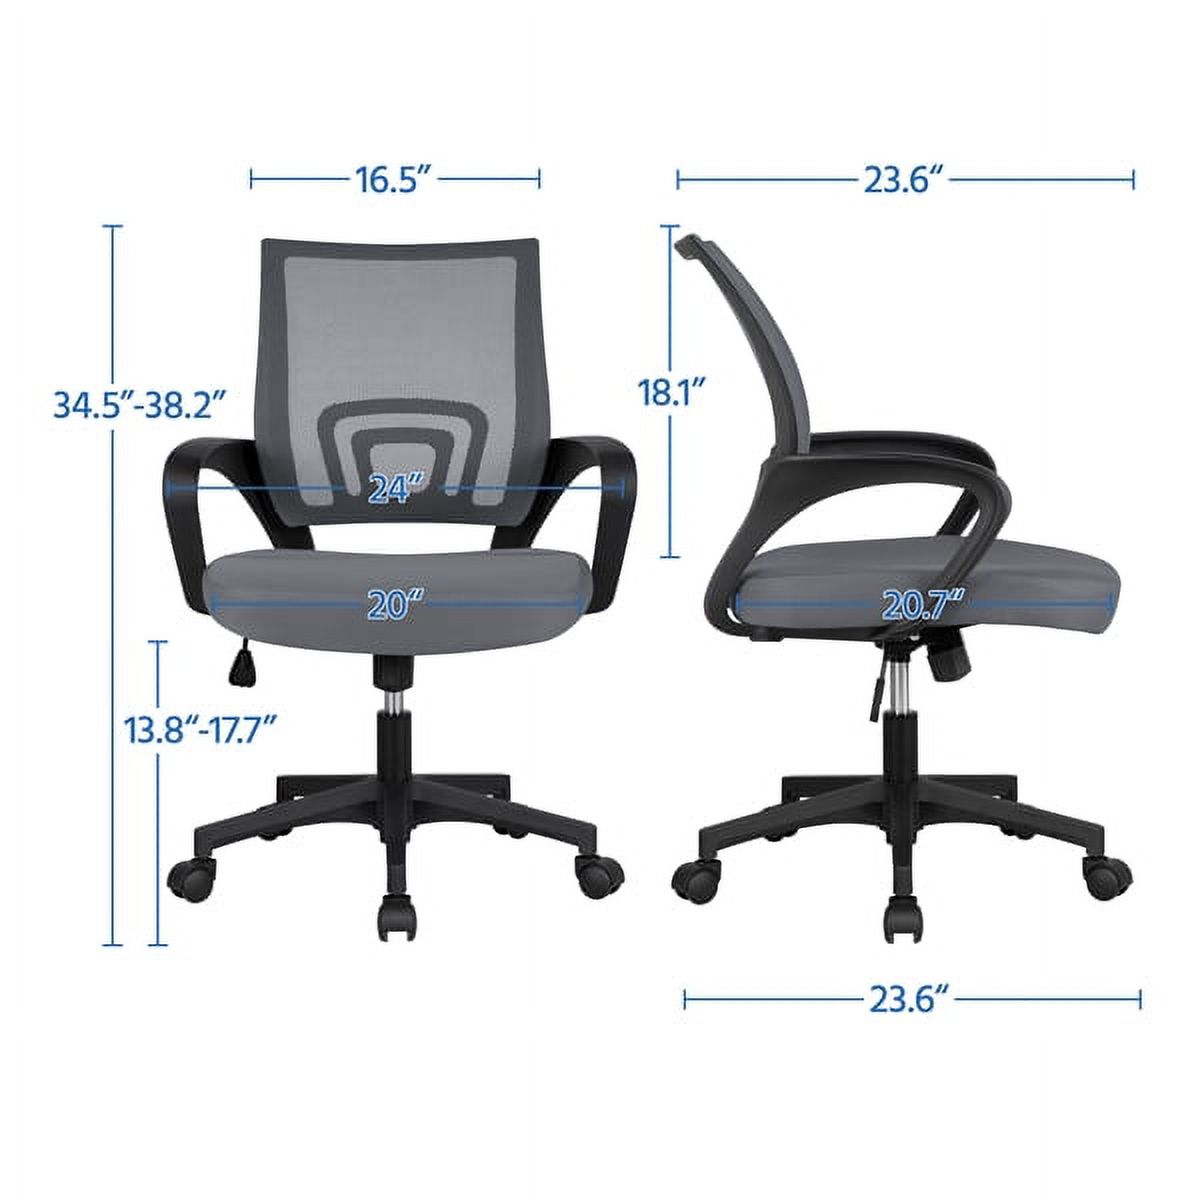 Adjustable Mesh Swivel Office Chair with Armrest, Set of 2, Dark Gray - image 3 of 8